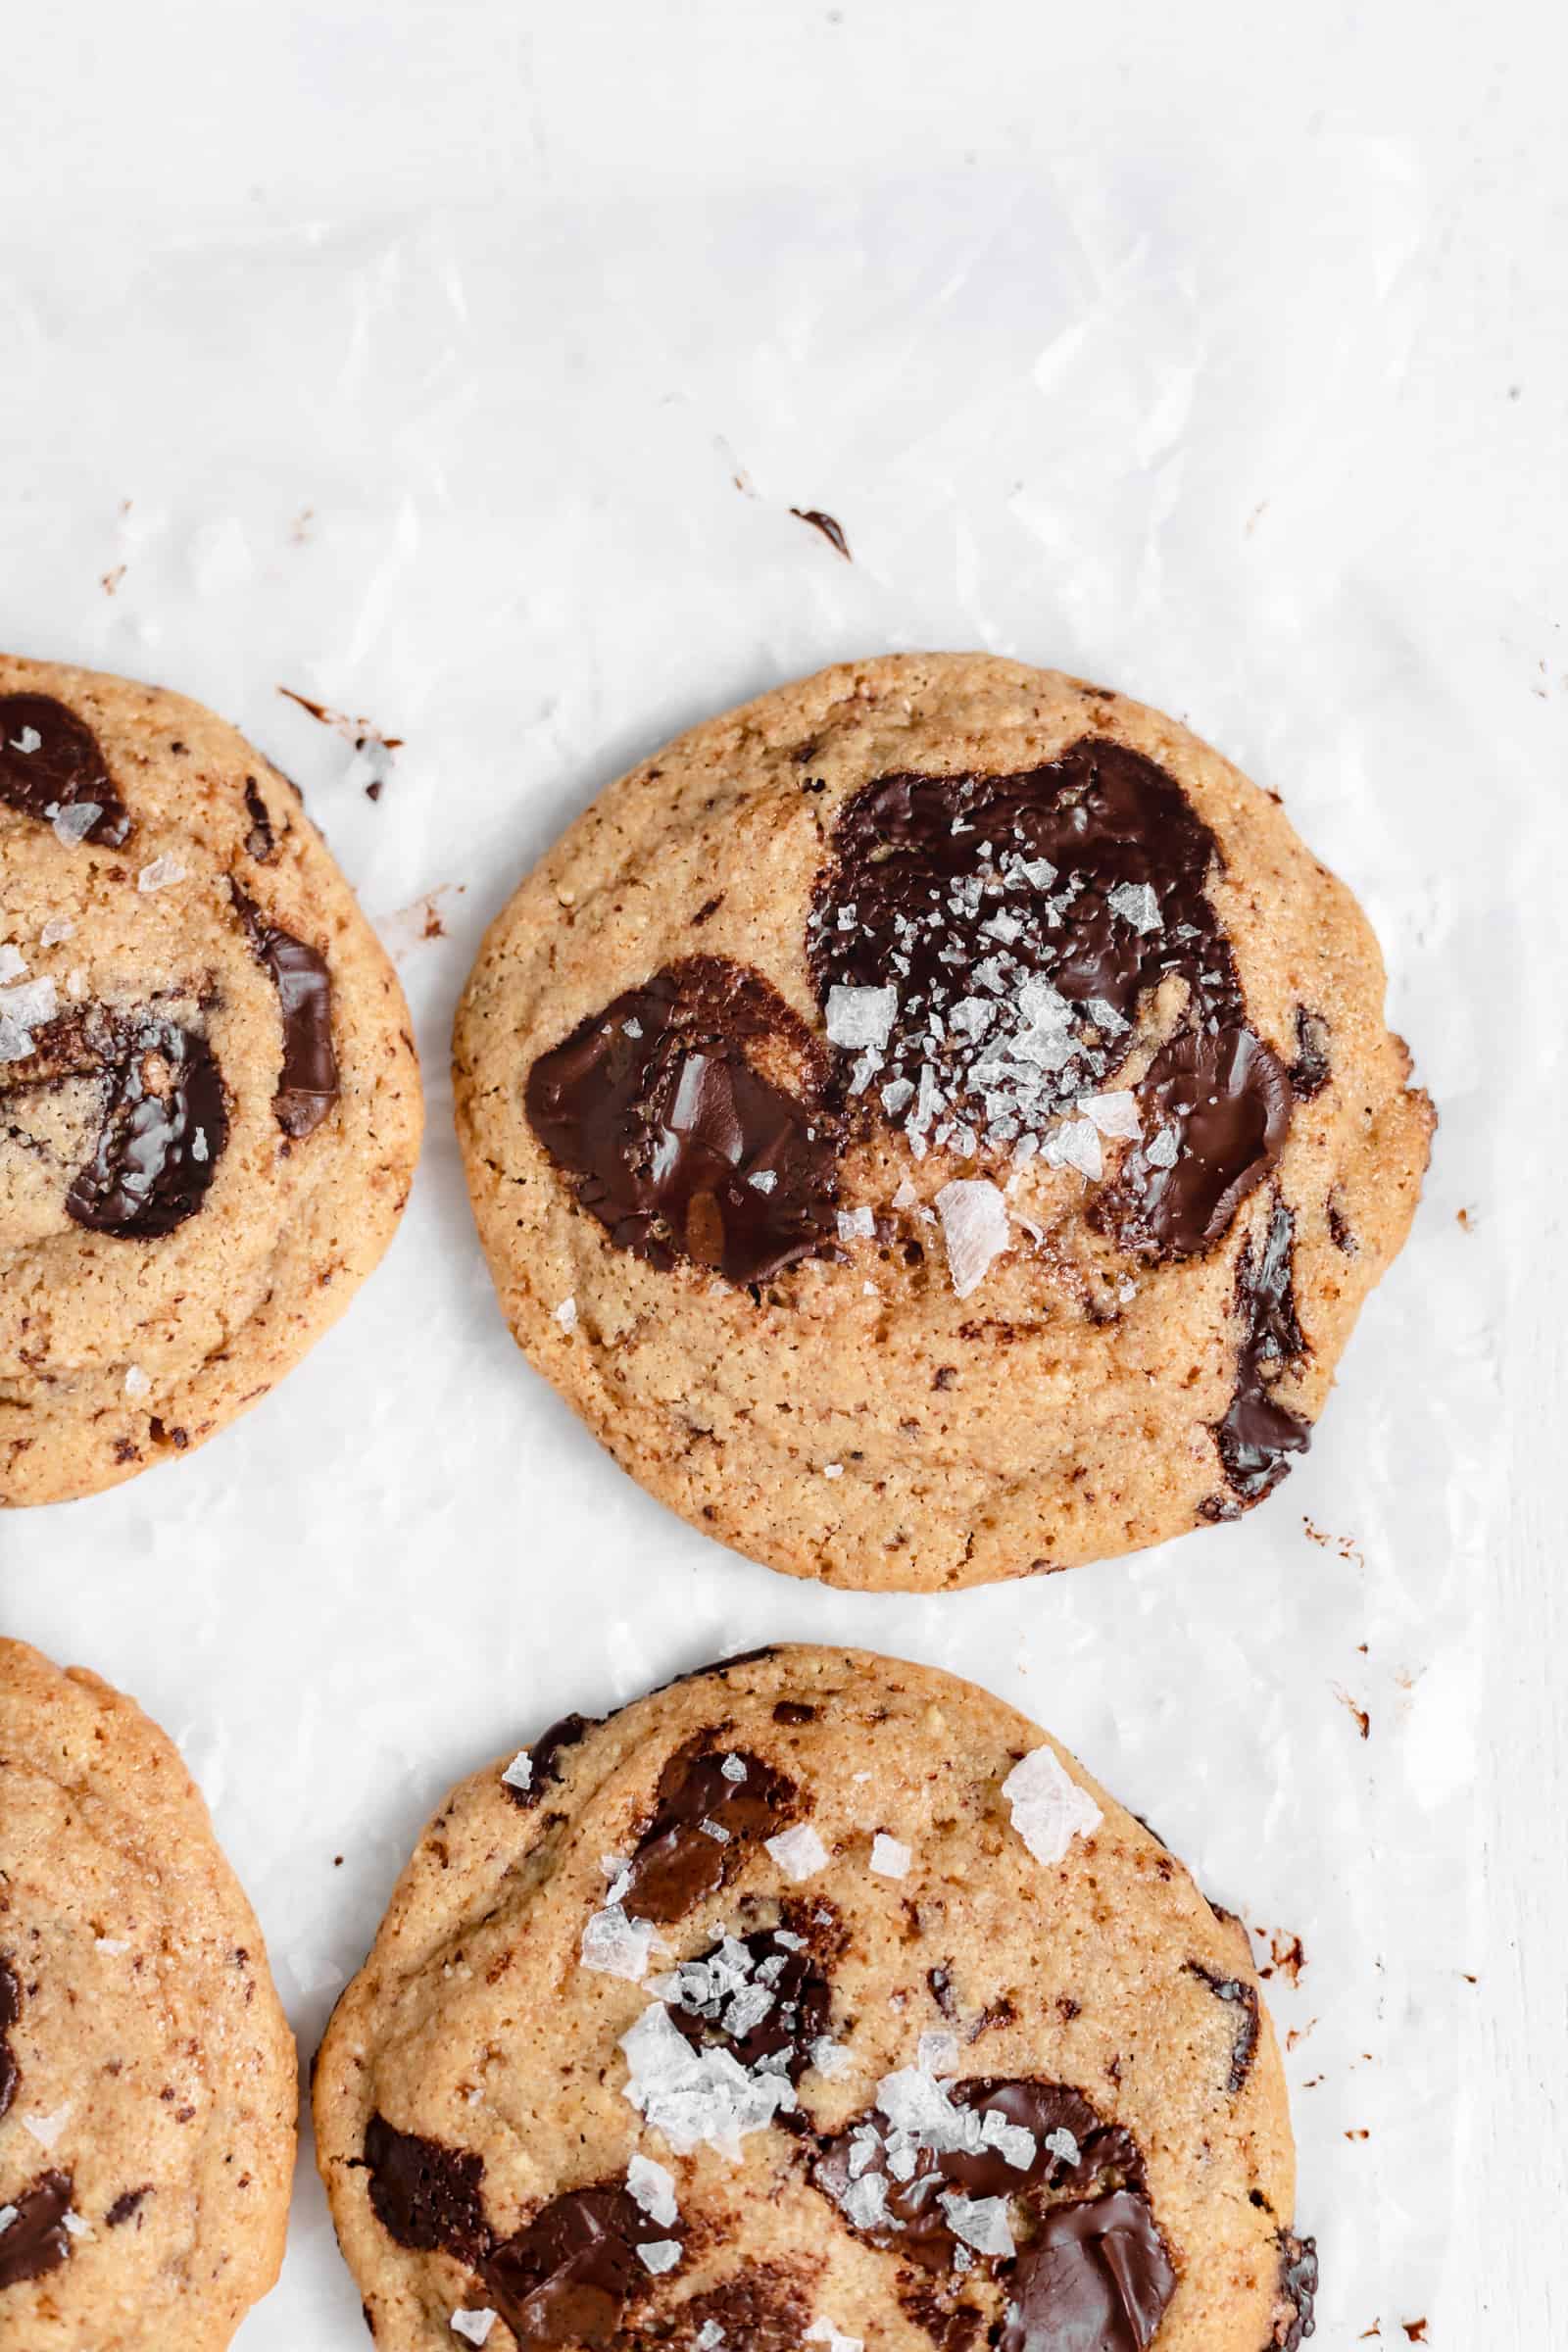 The ultimate paleo chocolate chip cookies! Soft, chewy, and highly addicting, these cookies are made with wholesome ingredients and lots of chocolate chunks! (Gluten Free, Dairy Free, No Refined Sugar)